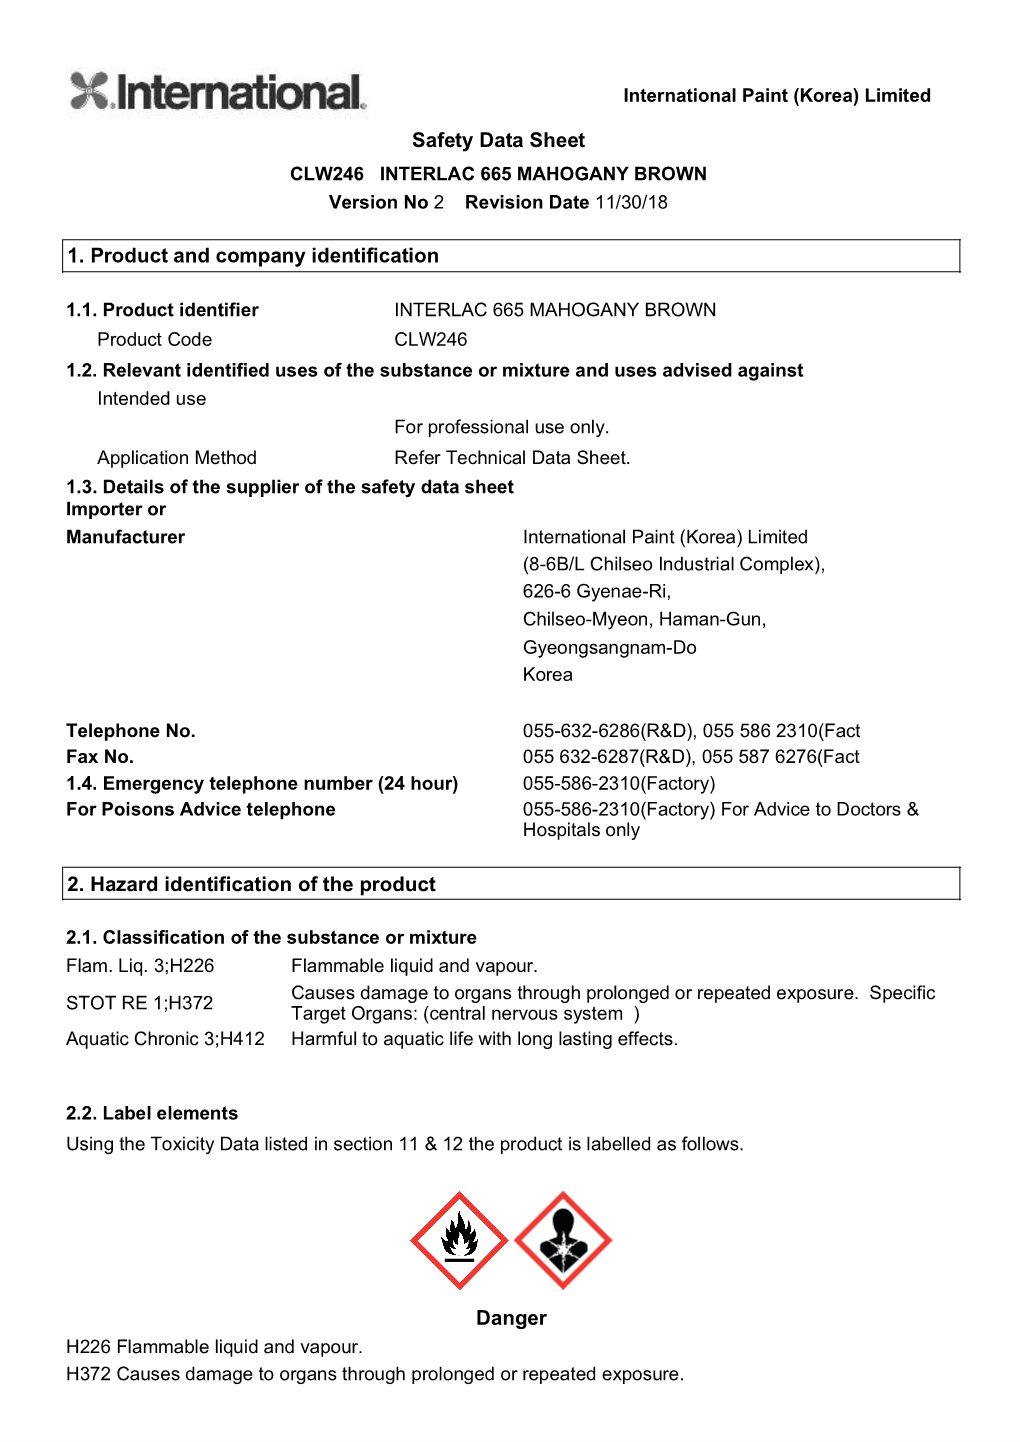 Safety Data Sheet 1. Product and Company Identification 2. Hazard Identification of the Product Danger